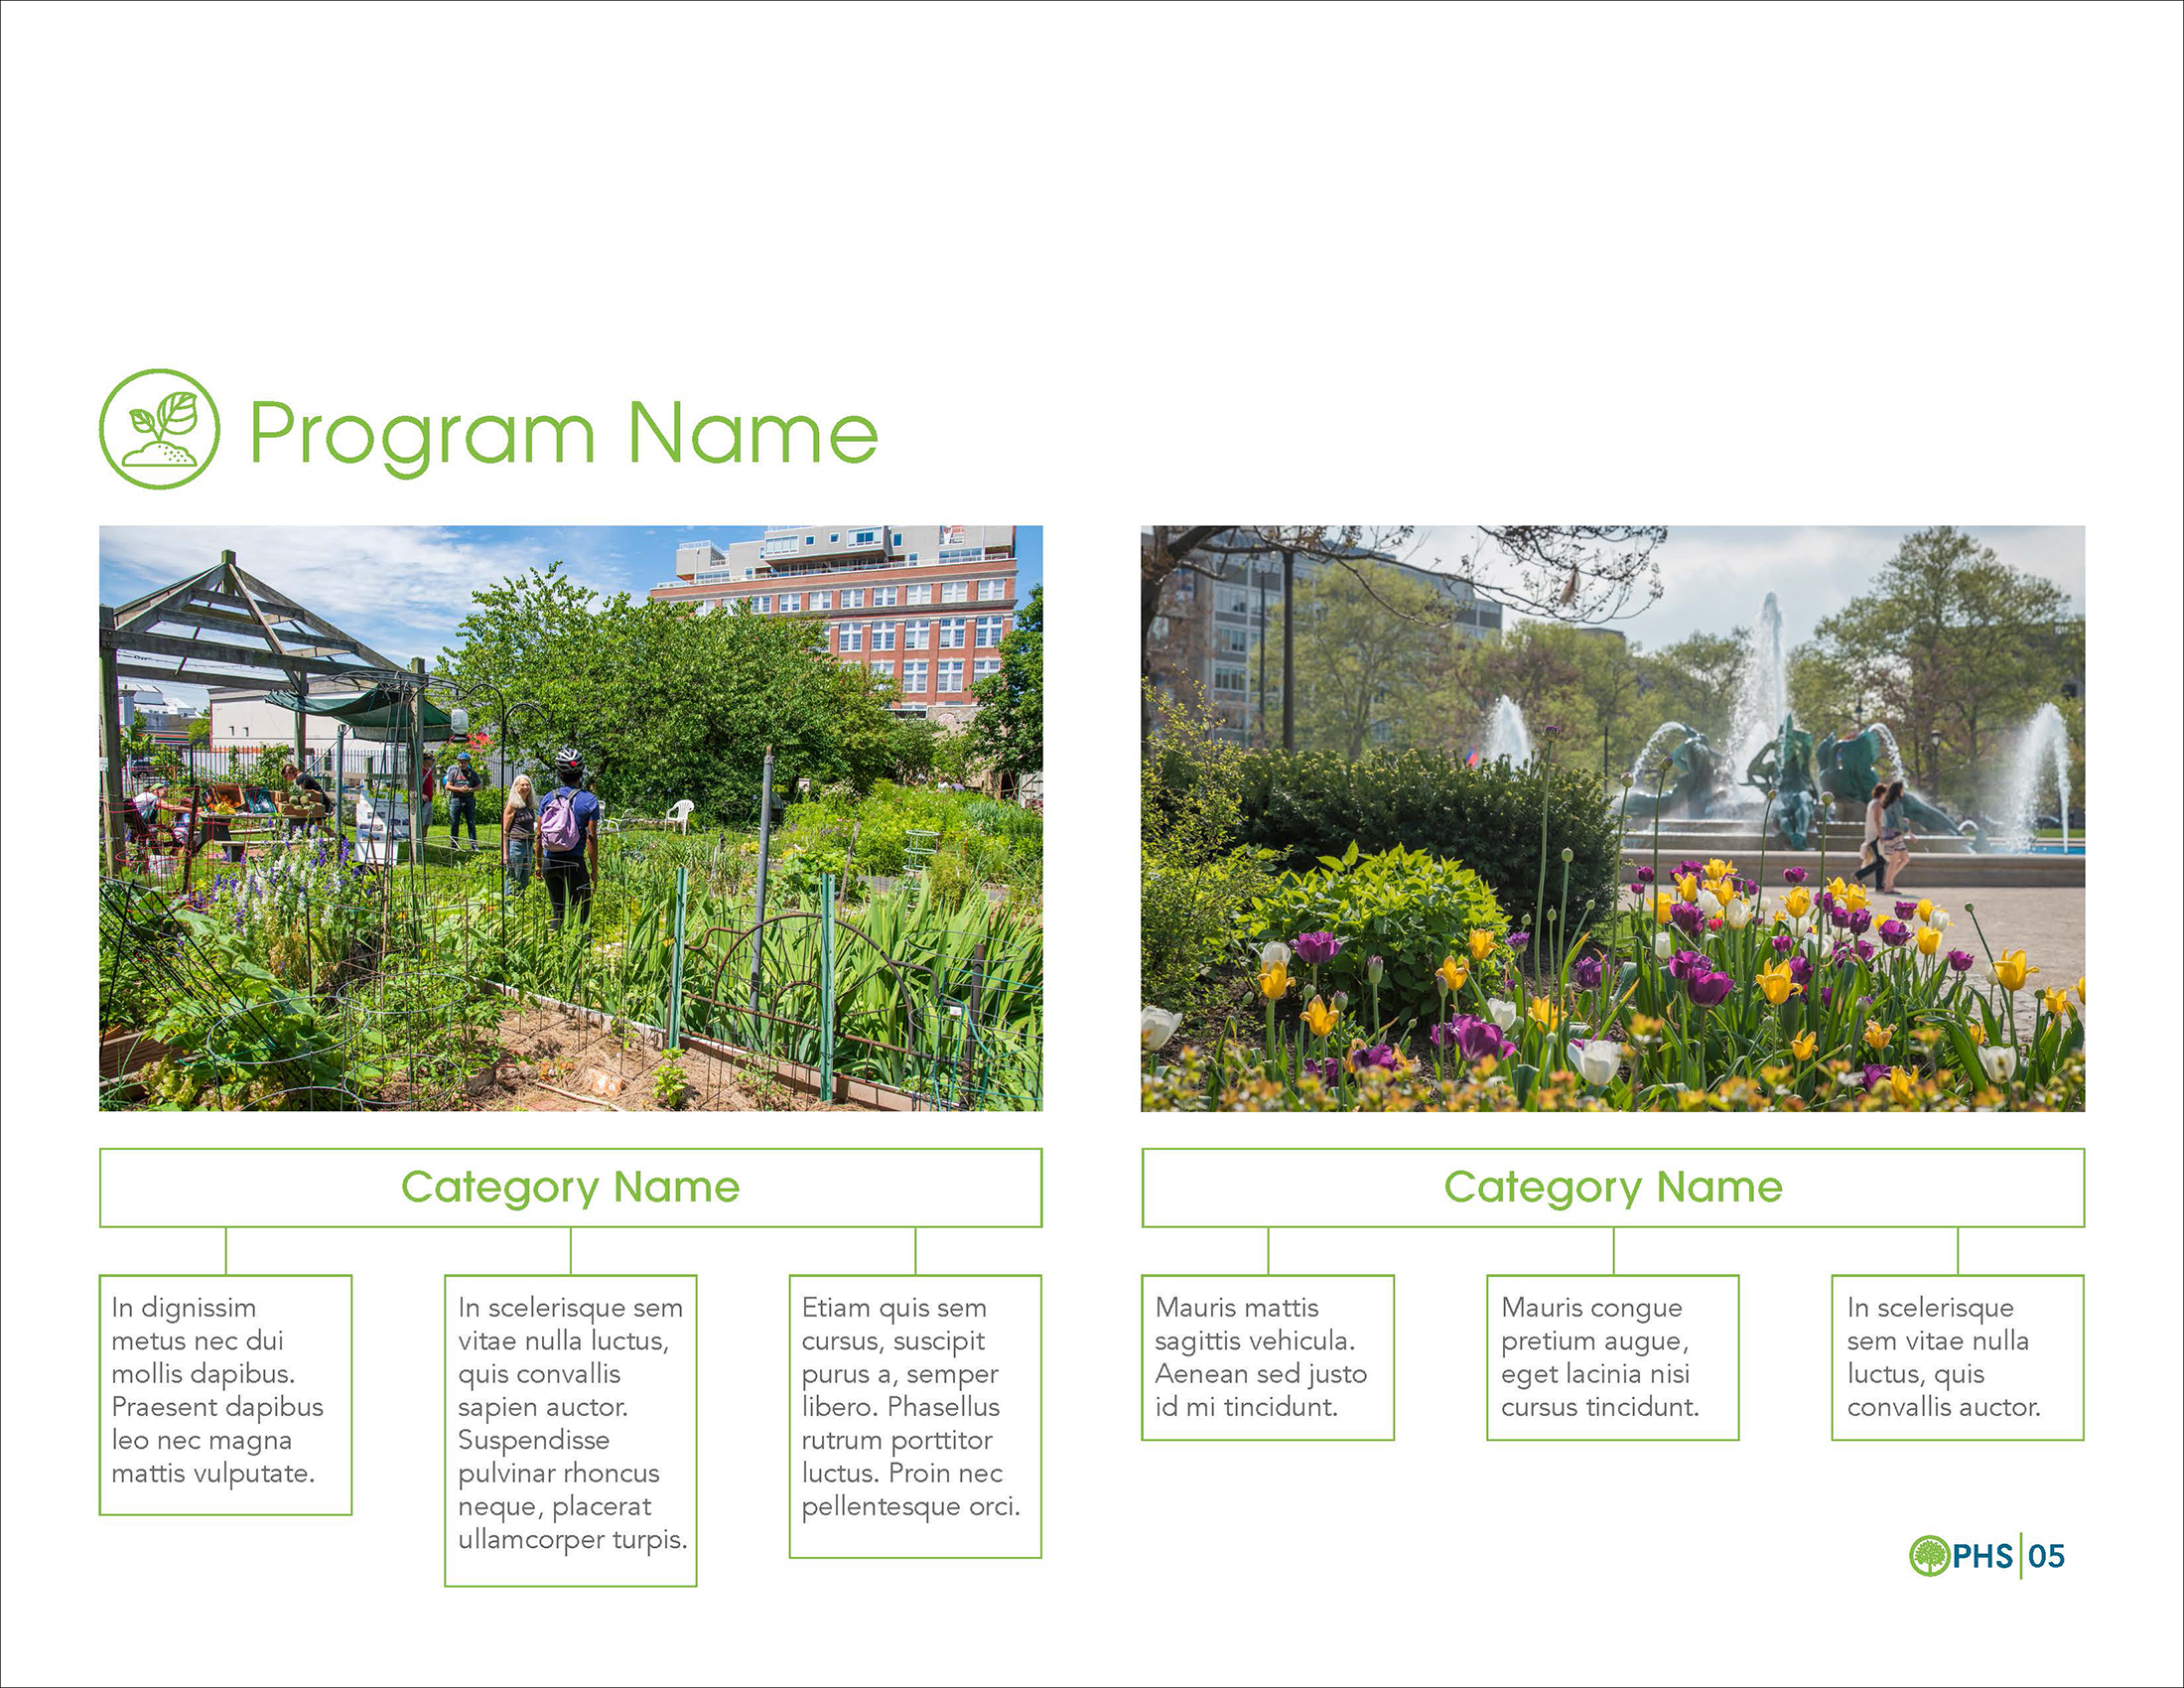 A spread from a 2019 PHS Proposal.